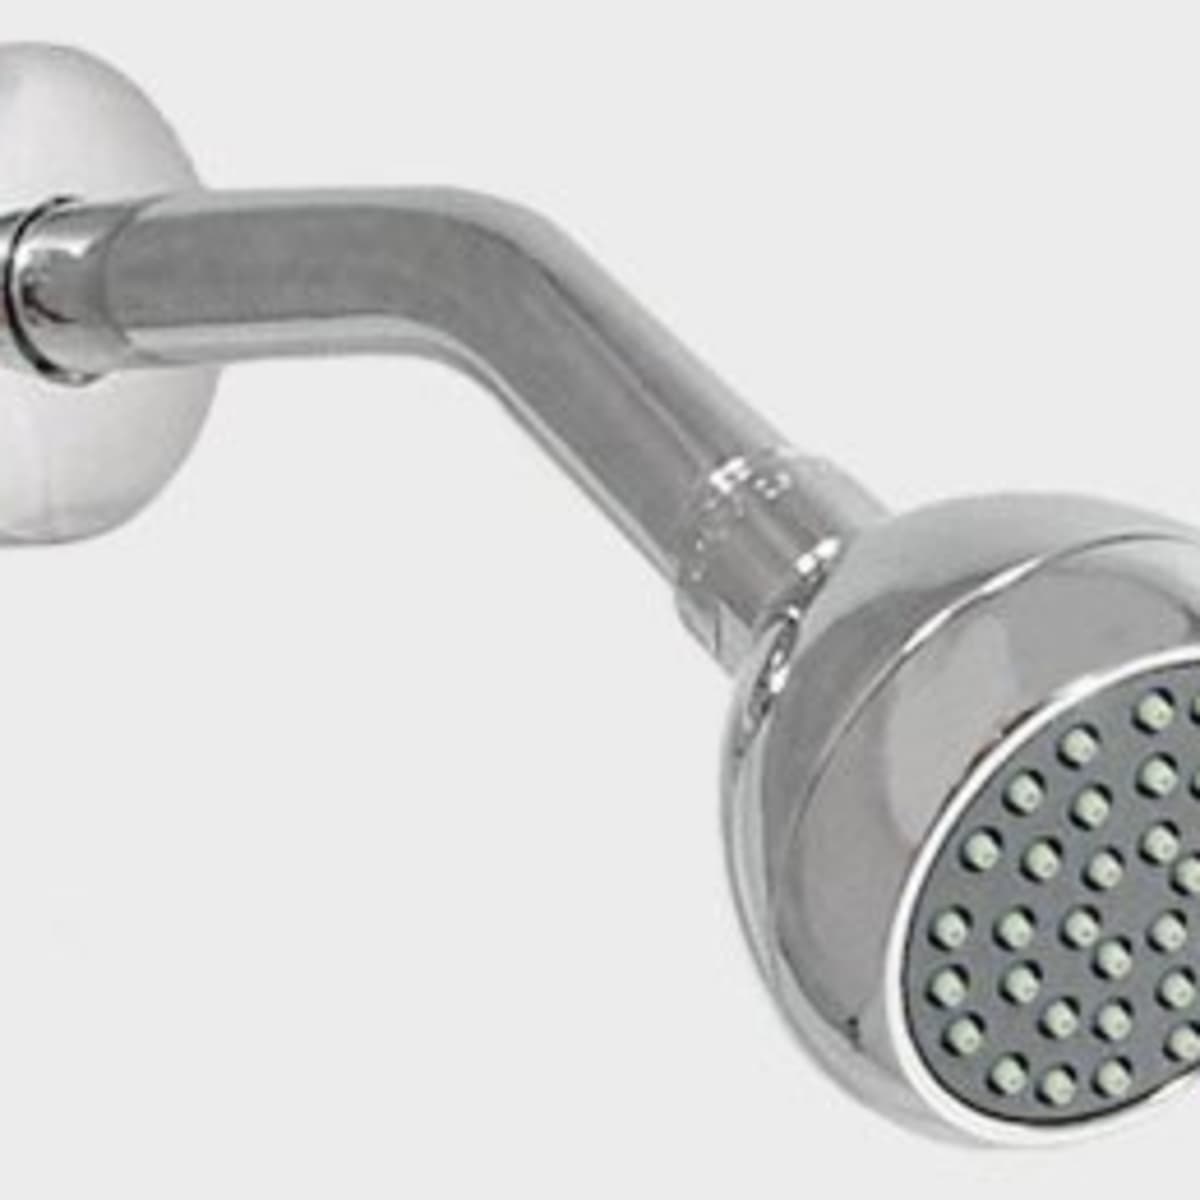 Shower Filter For Well Water